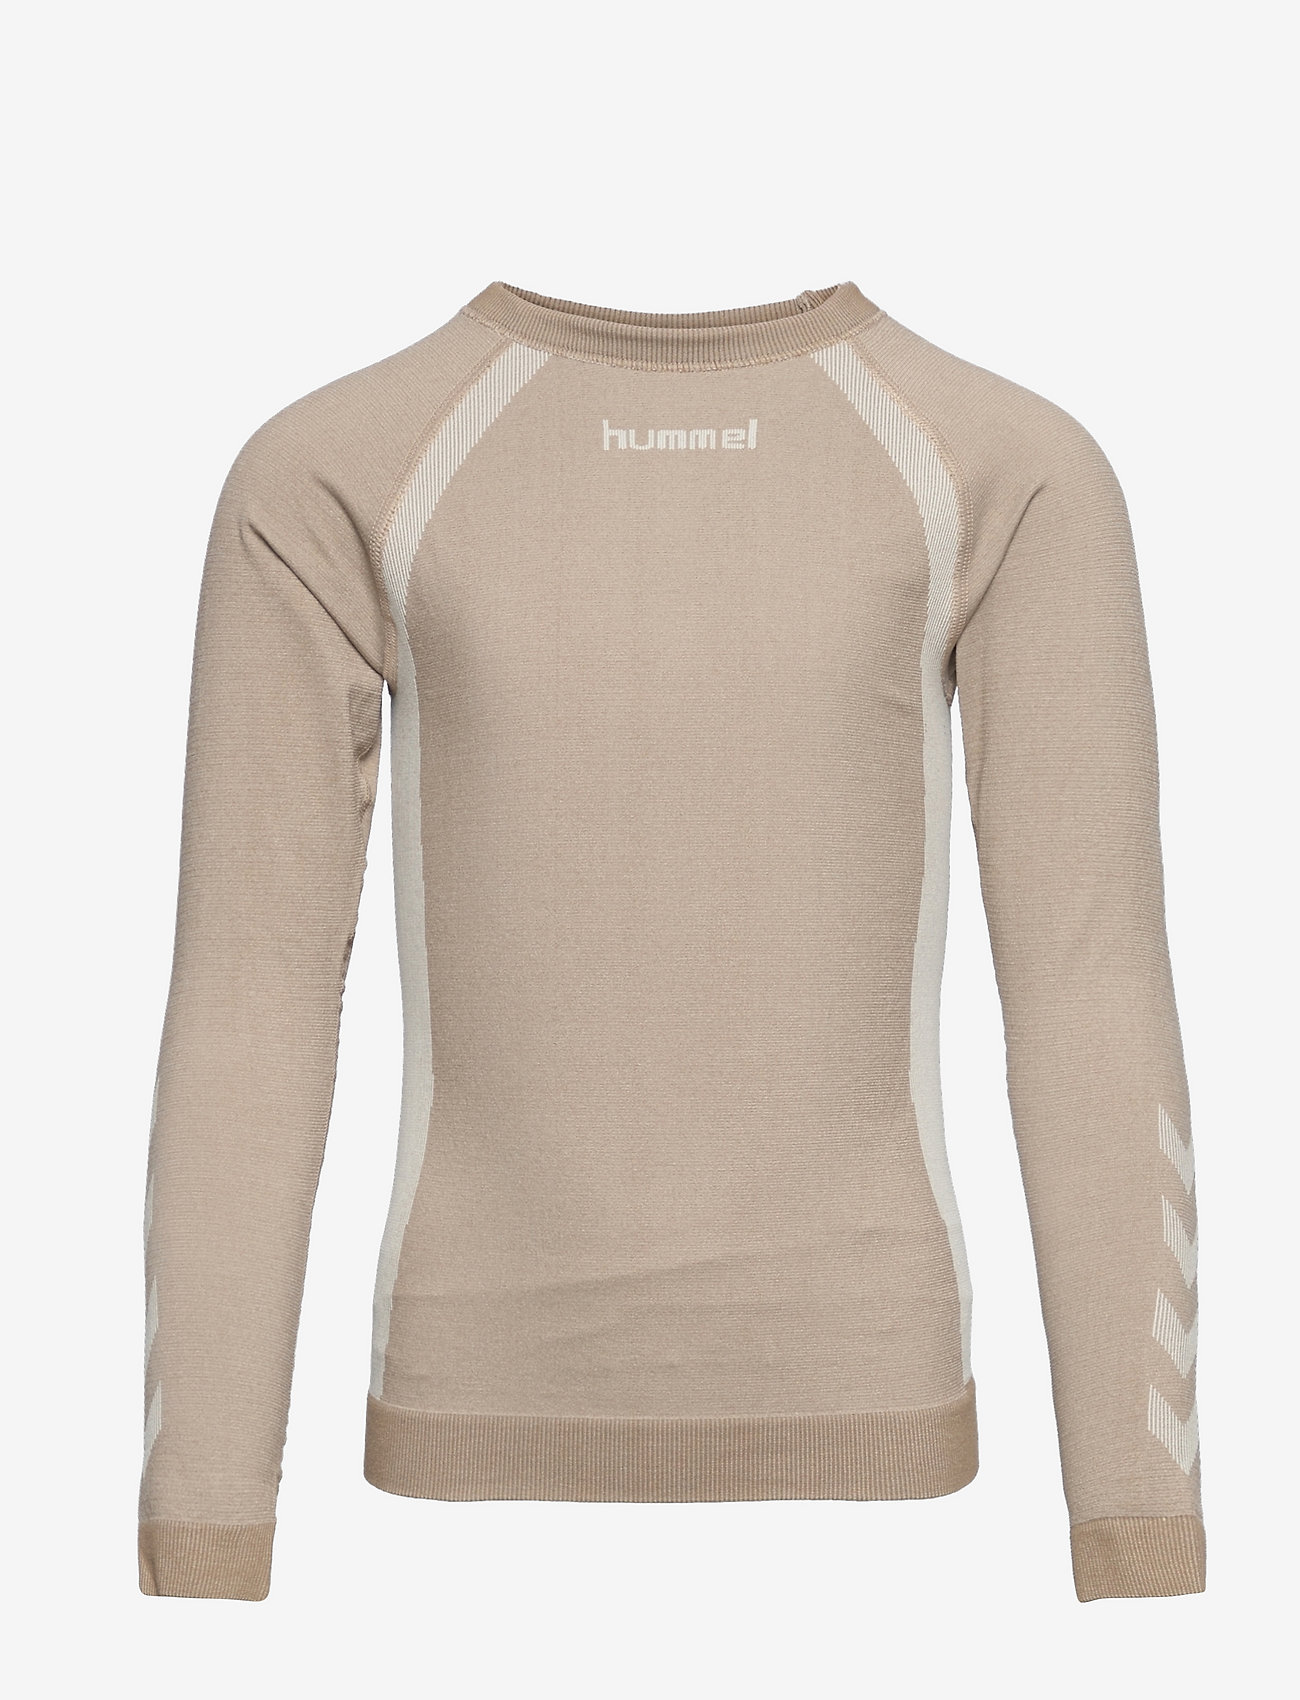 Hummel - hmlSPIN SEAMLESS T-SHIRT L/S - sports tops - simply taupe - 0